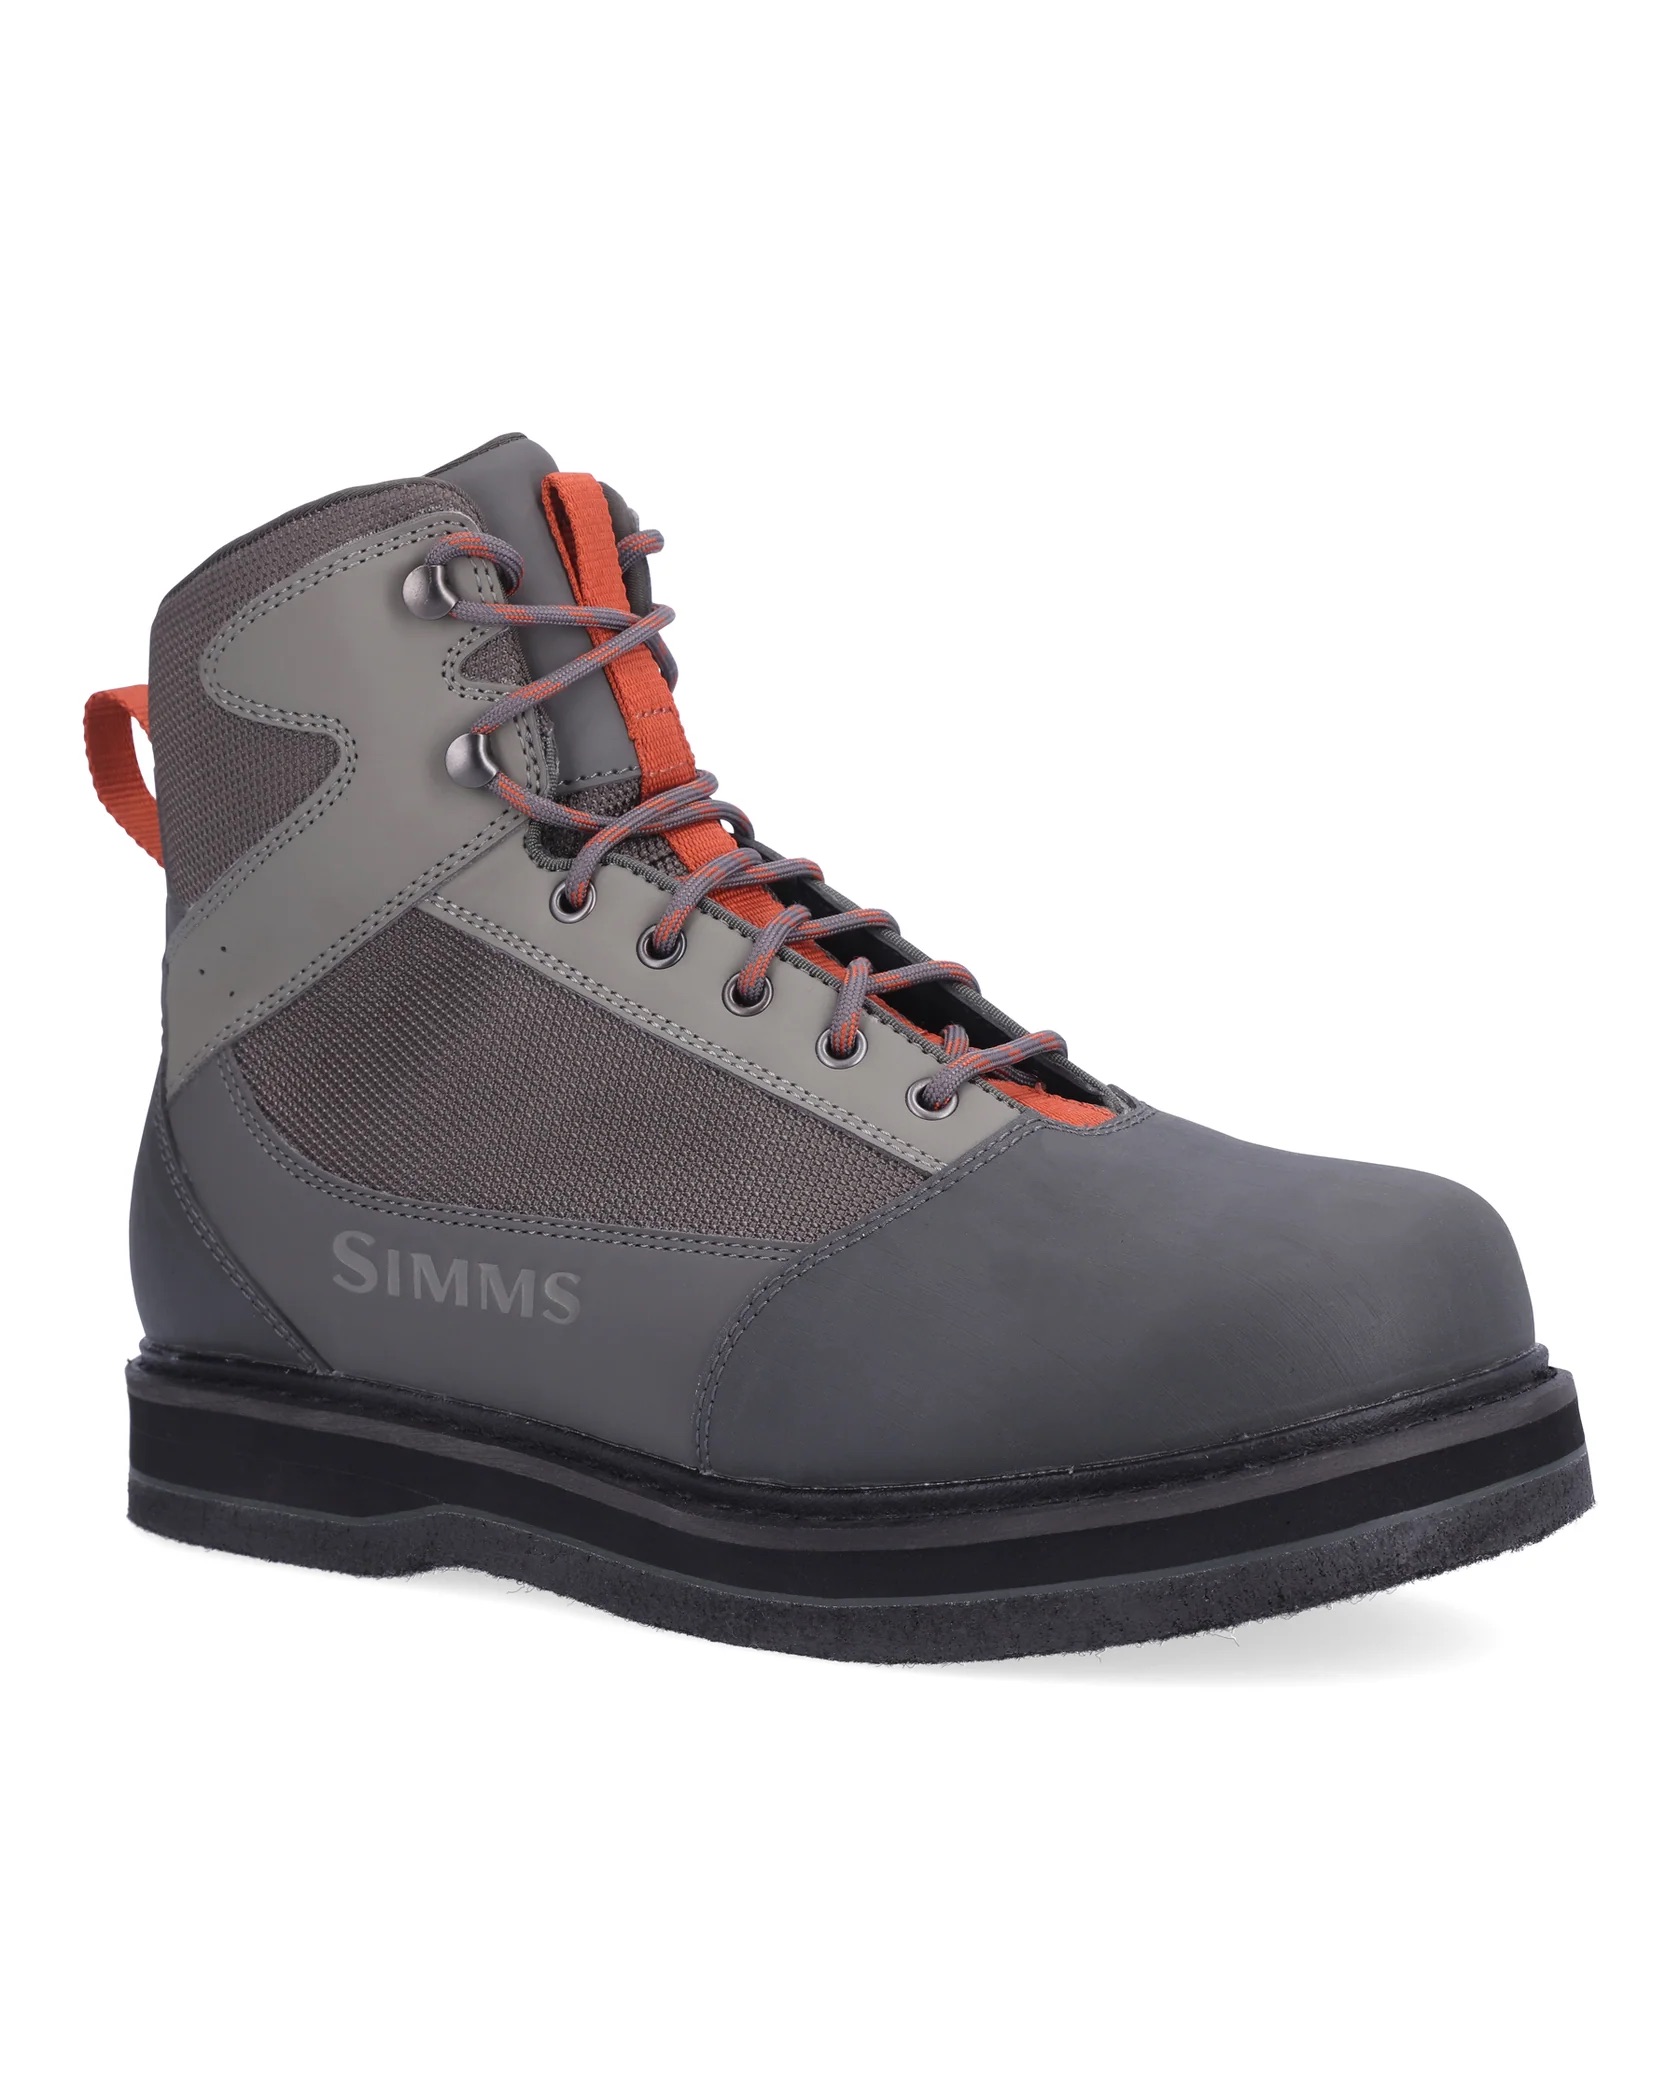 Simms Tributary Wading Boot - Felt - Size 12